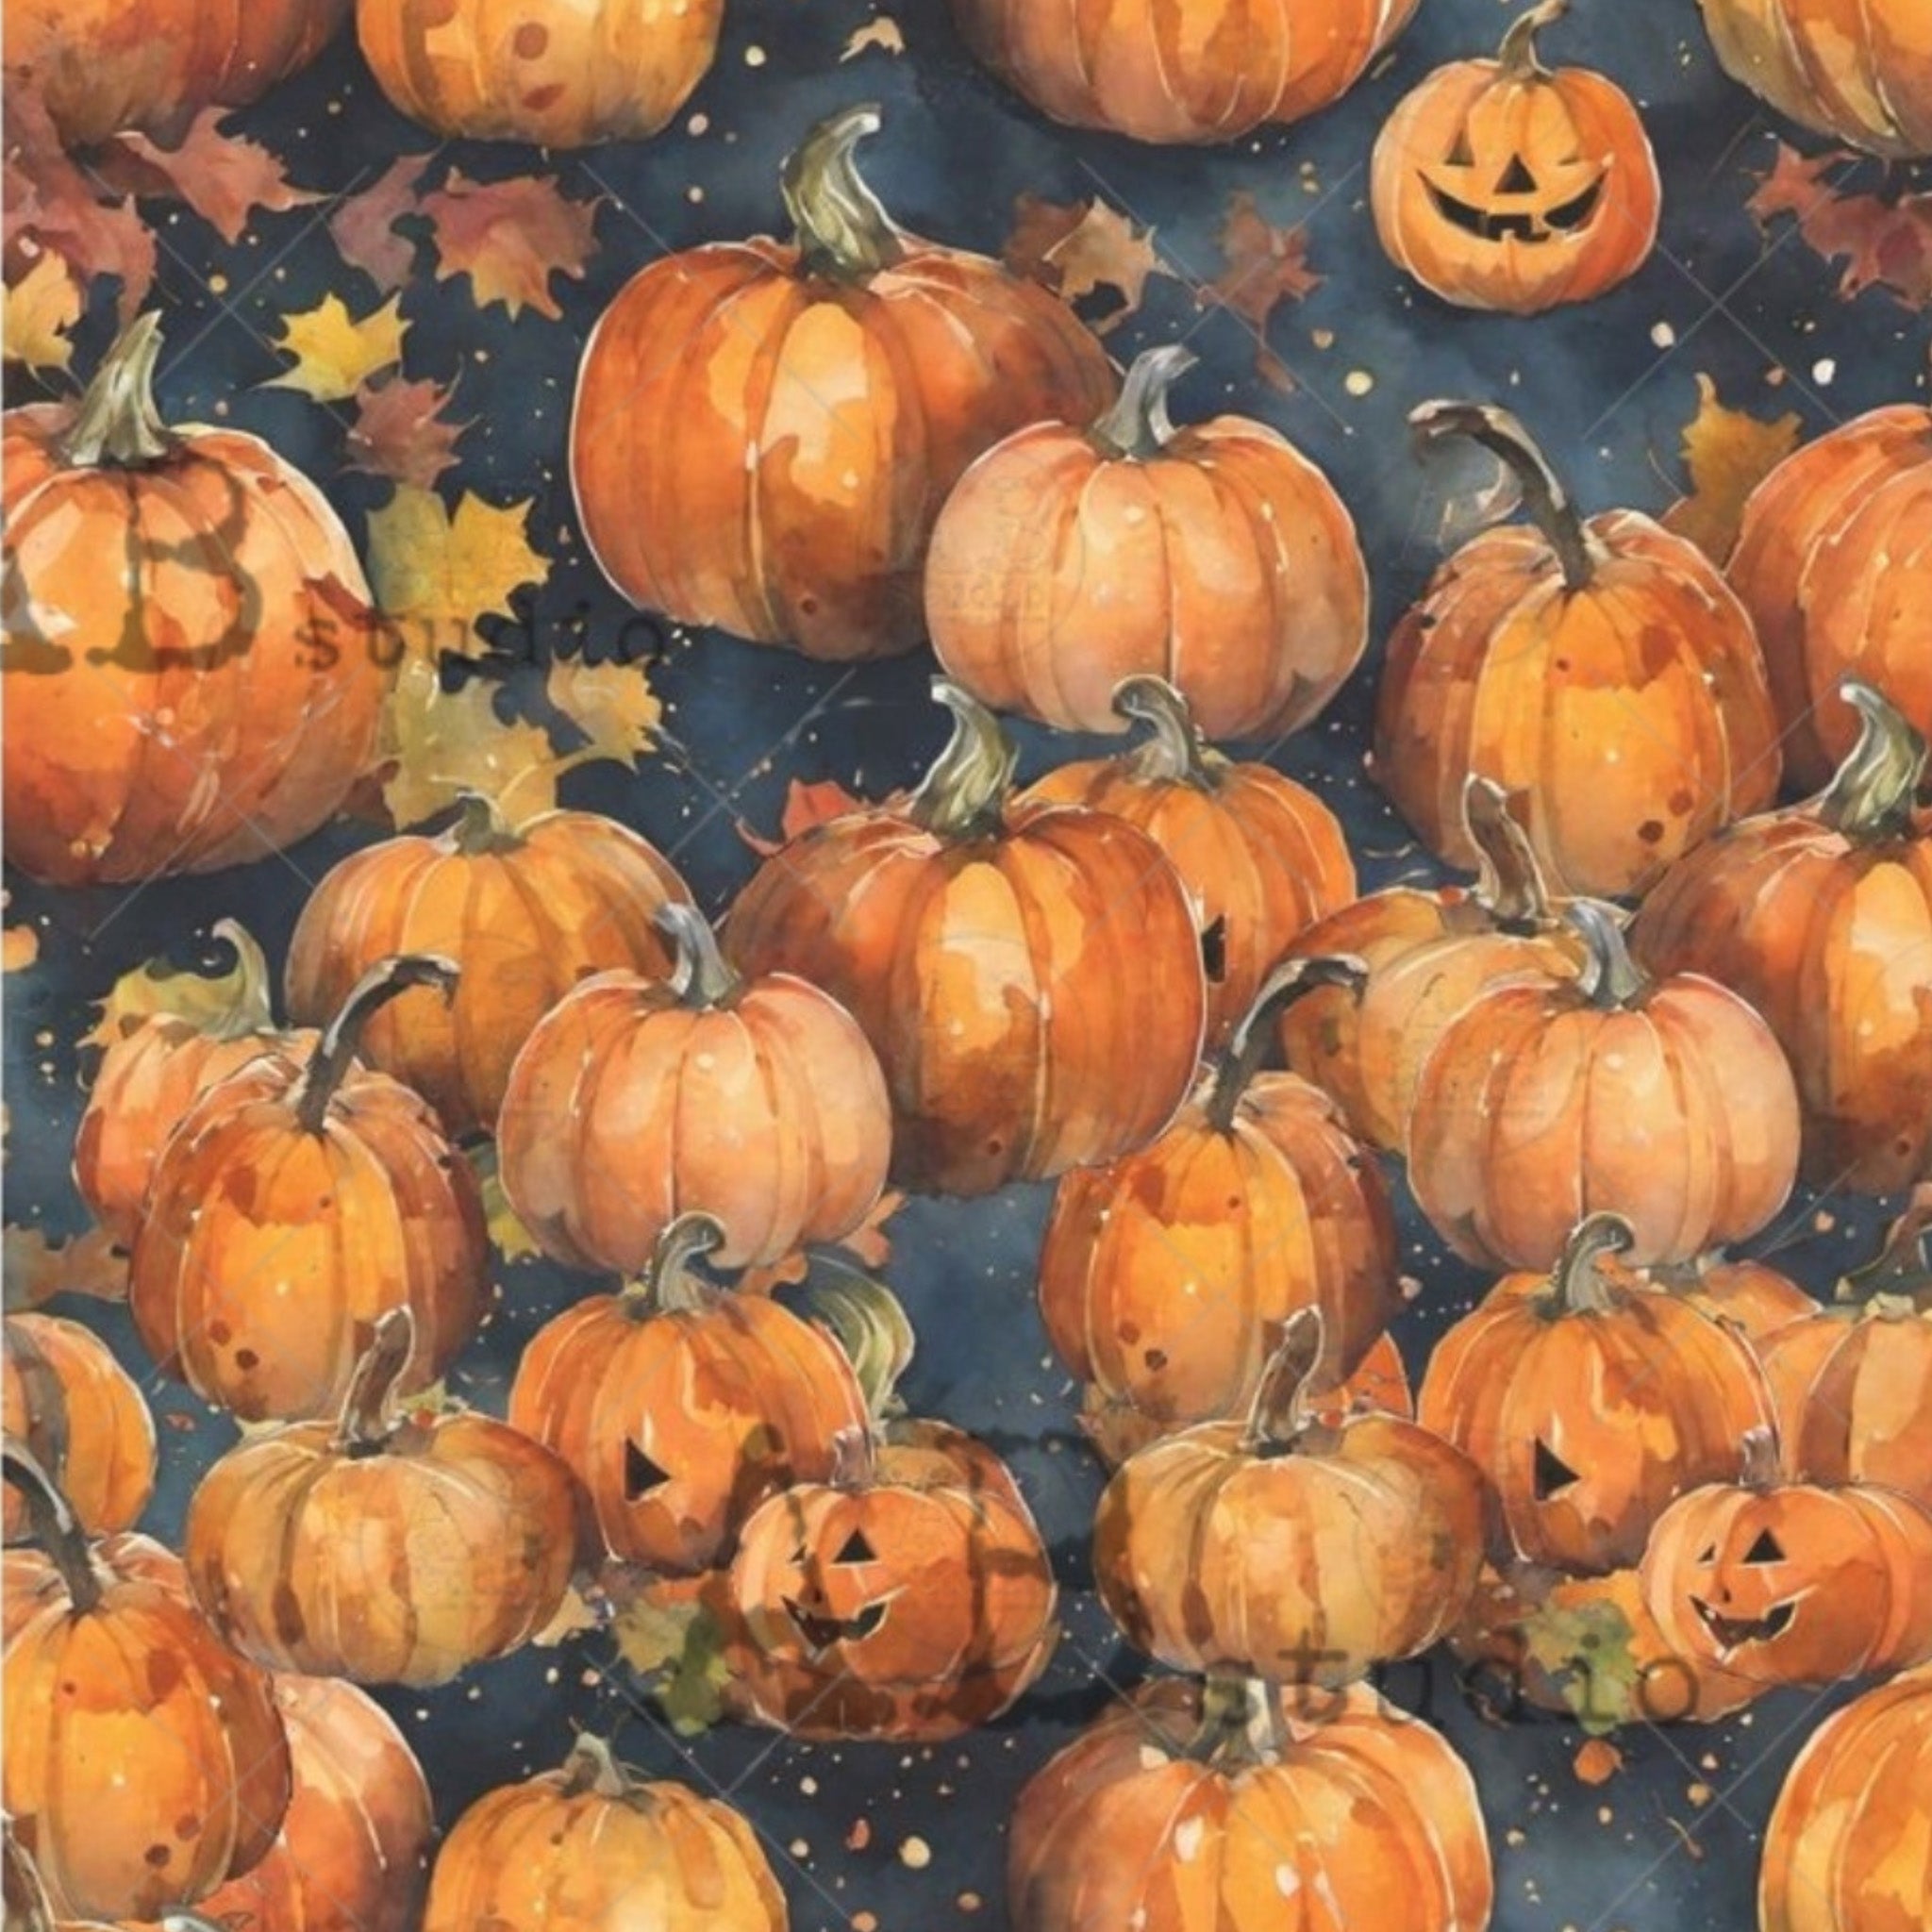 Close-up of an A4 rice paper that features a smoky background, complete with fall leaves, pumpkins, and jack-o-lanterns.